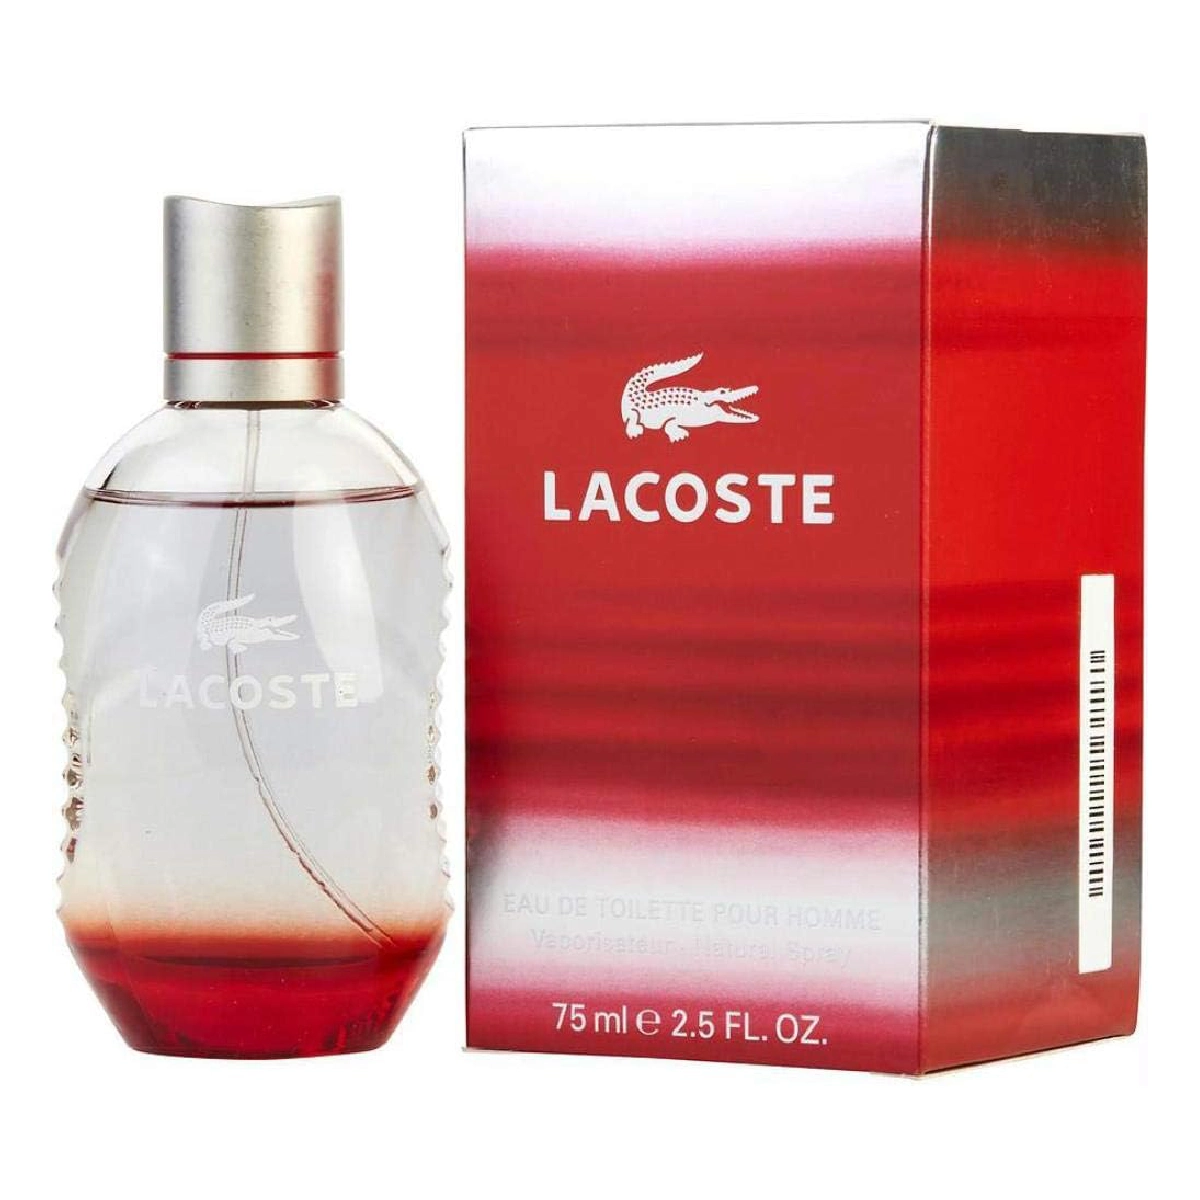 Lacoste Red Perfume bottle on white background